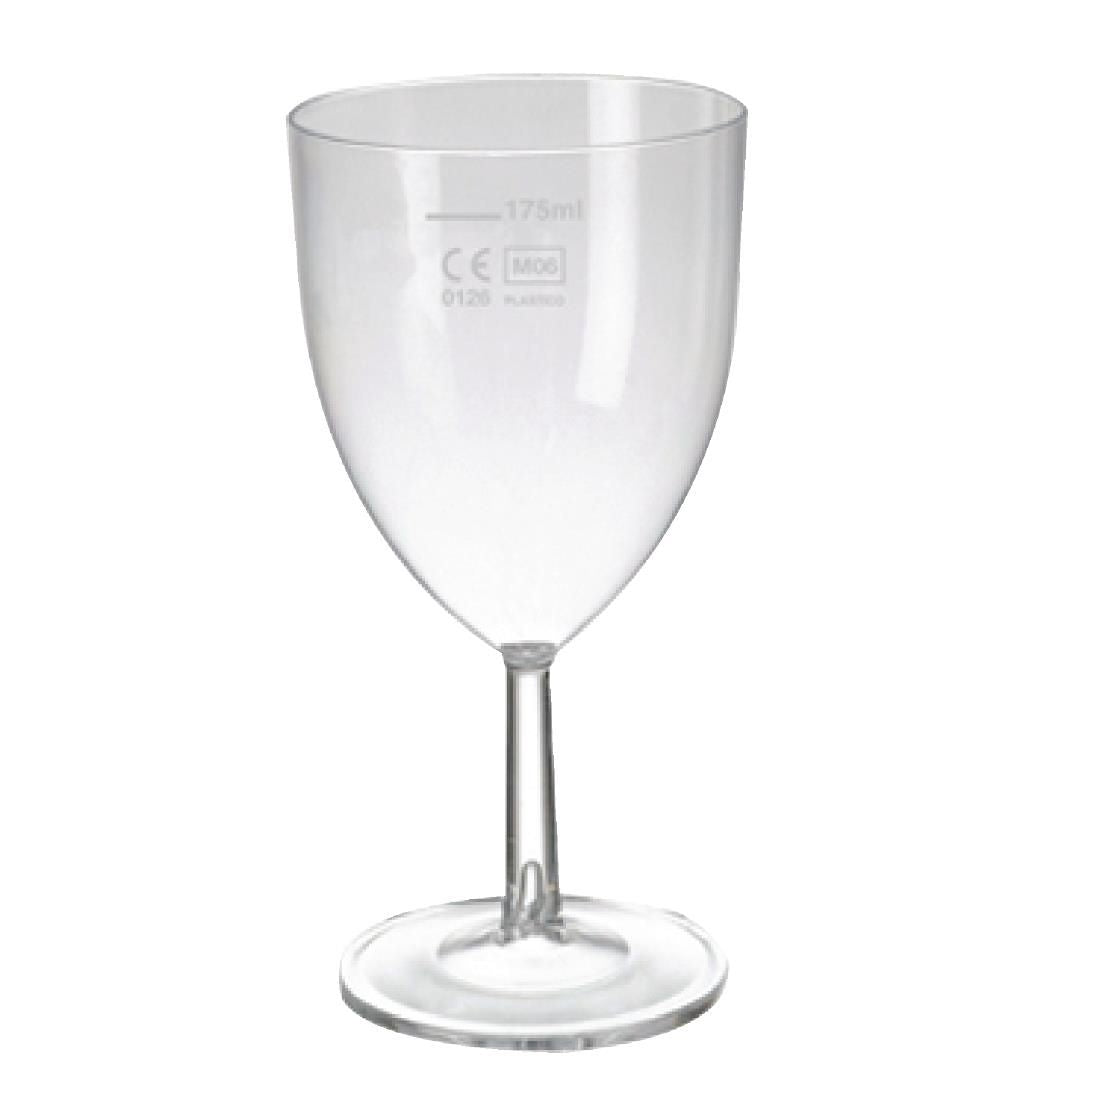 Polystyrene Wine Glasses 200ml CE Marked at 175ml (Pack of 48)